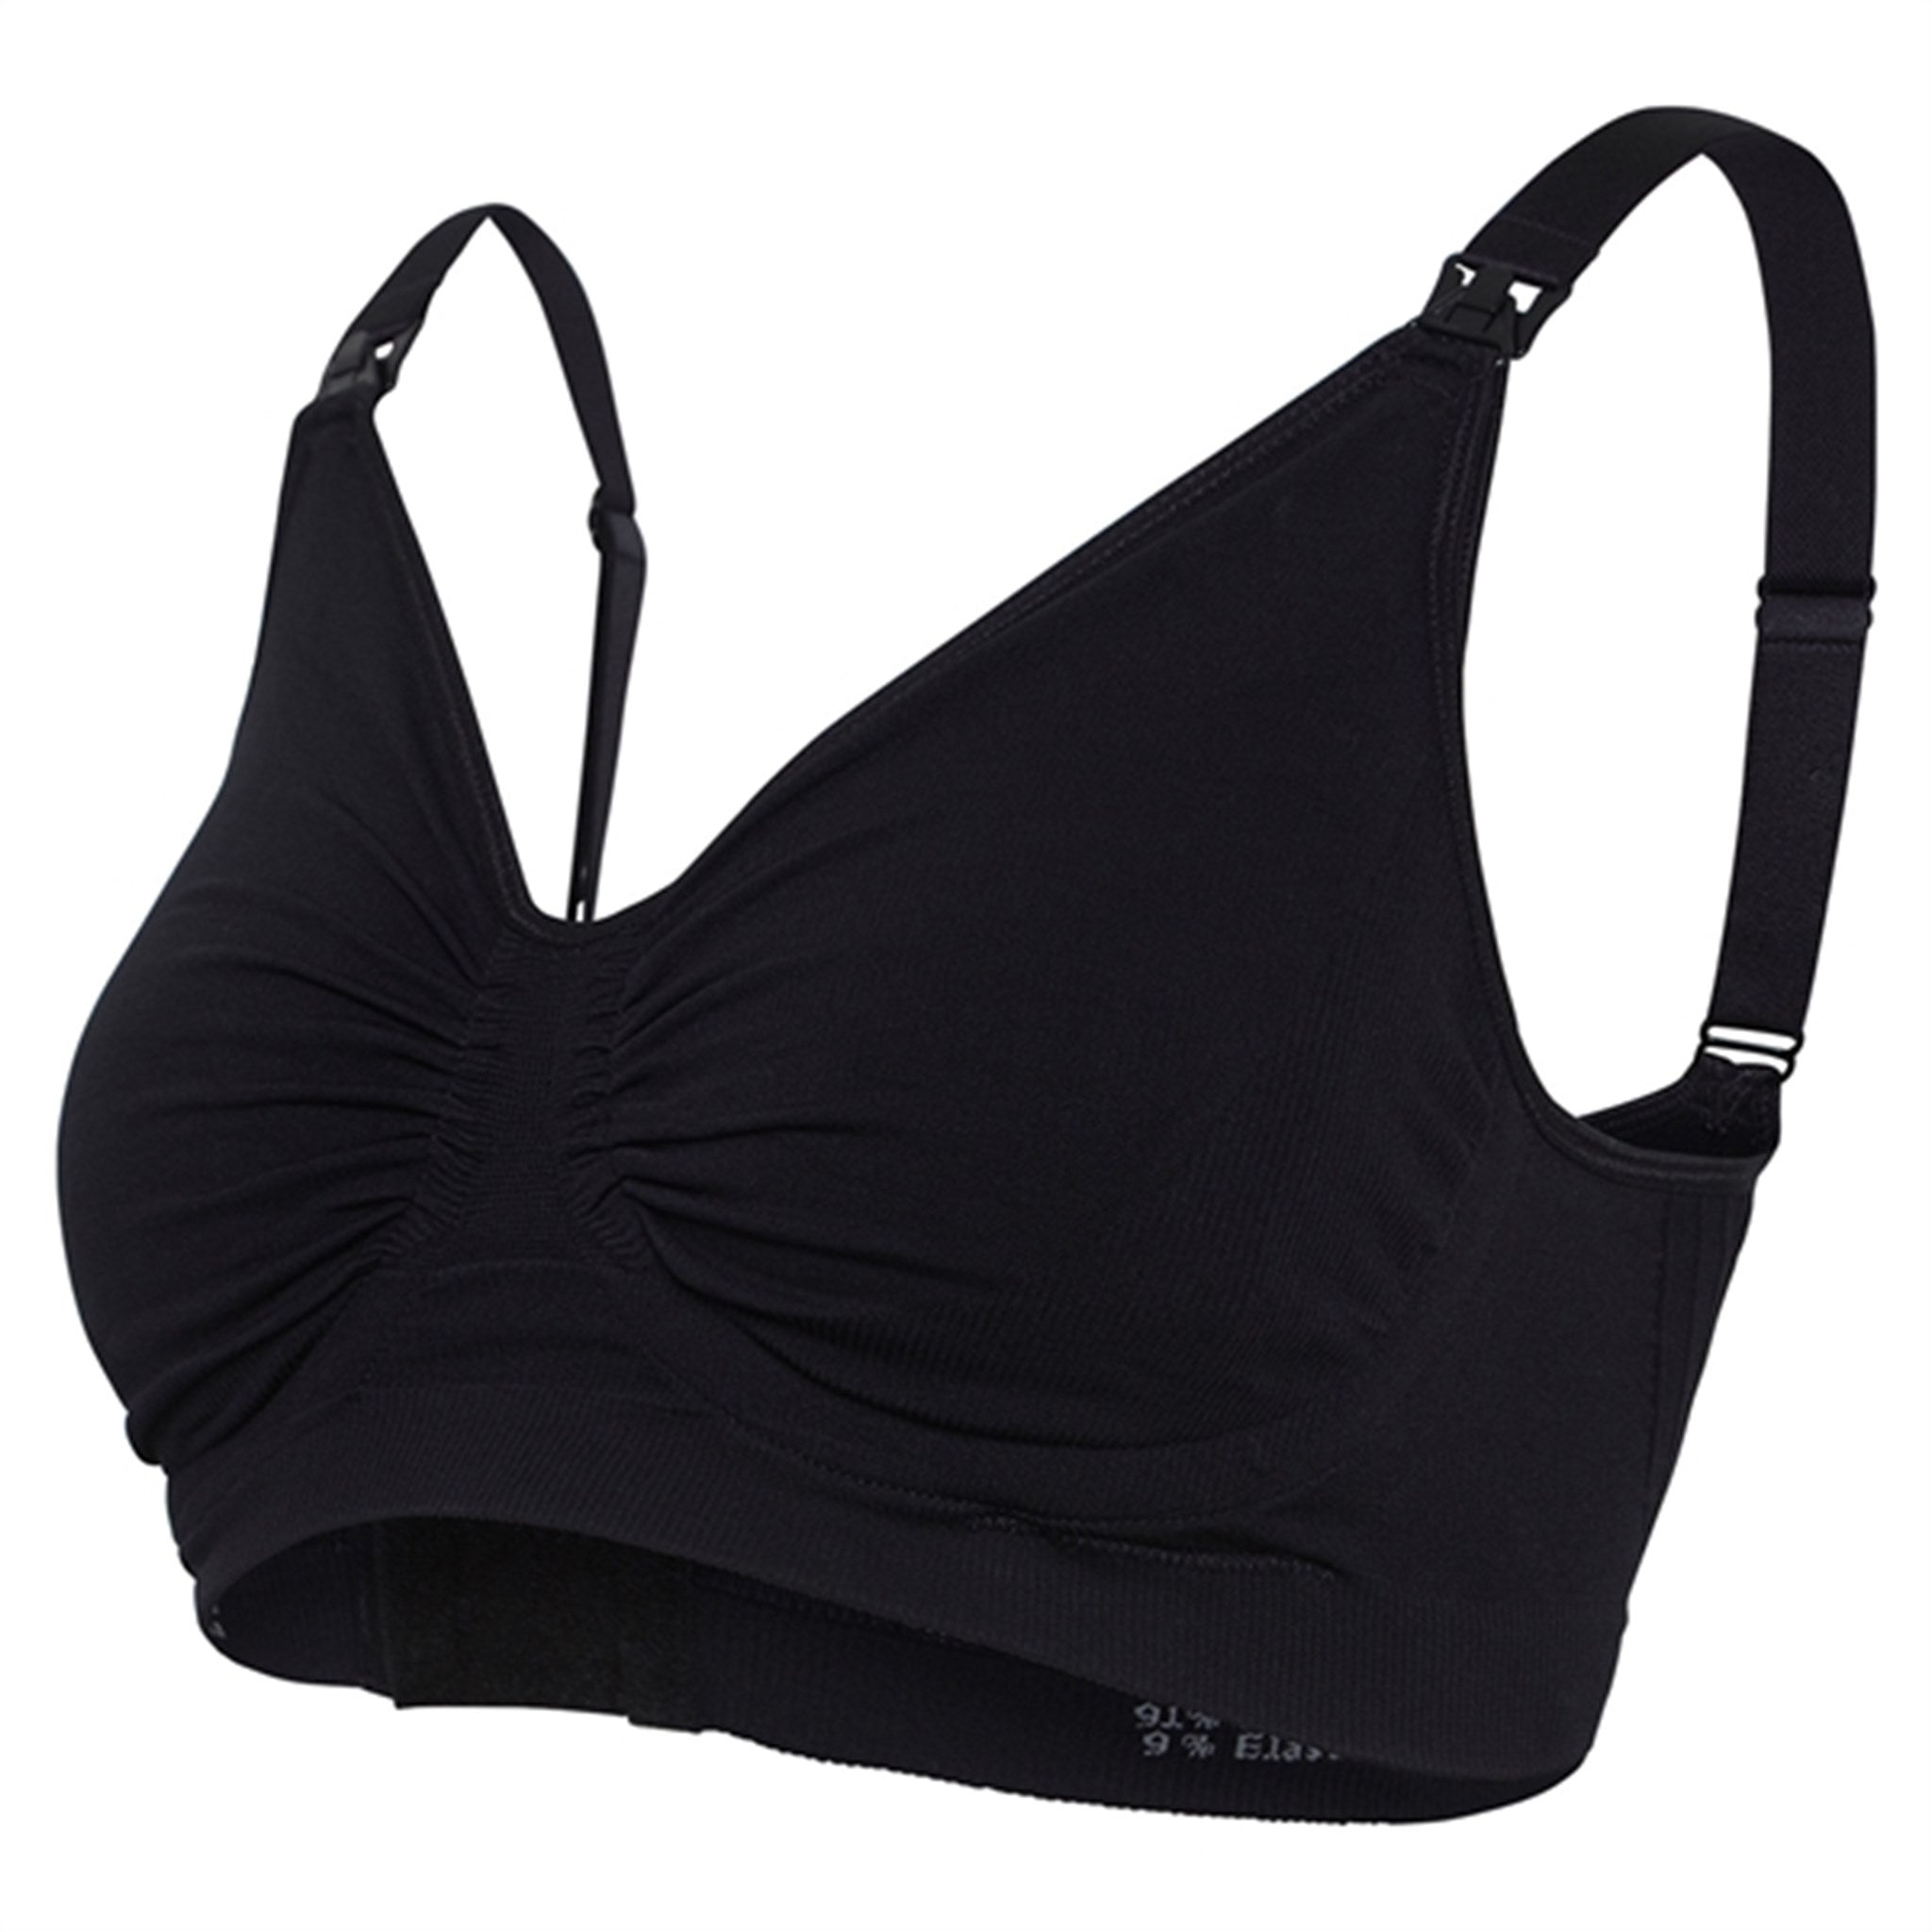 Carriwell Maternity And Nursing Bra With Carri-Gel Support Black